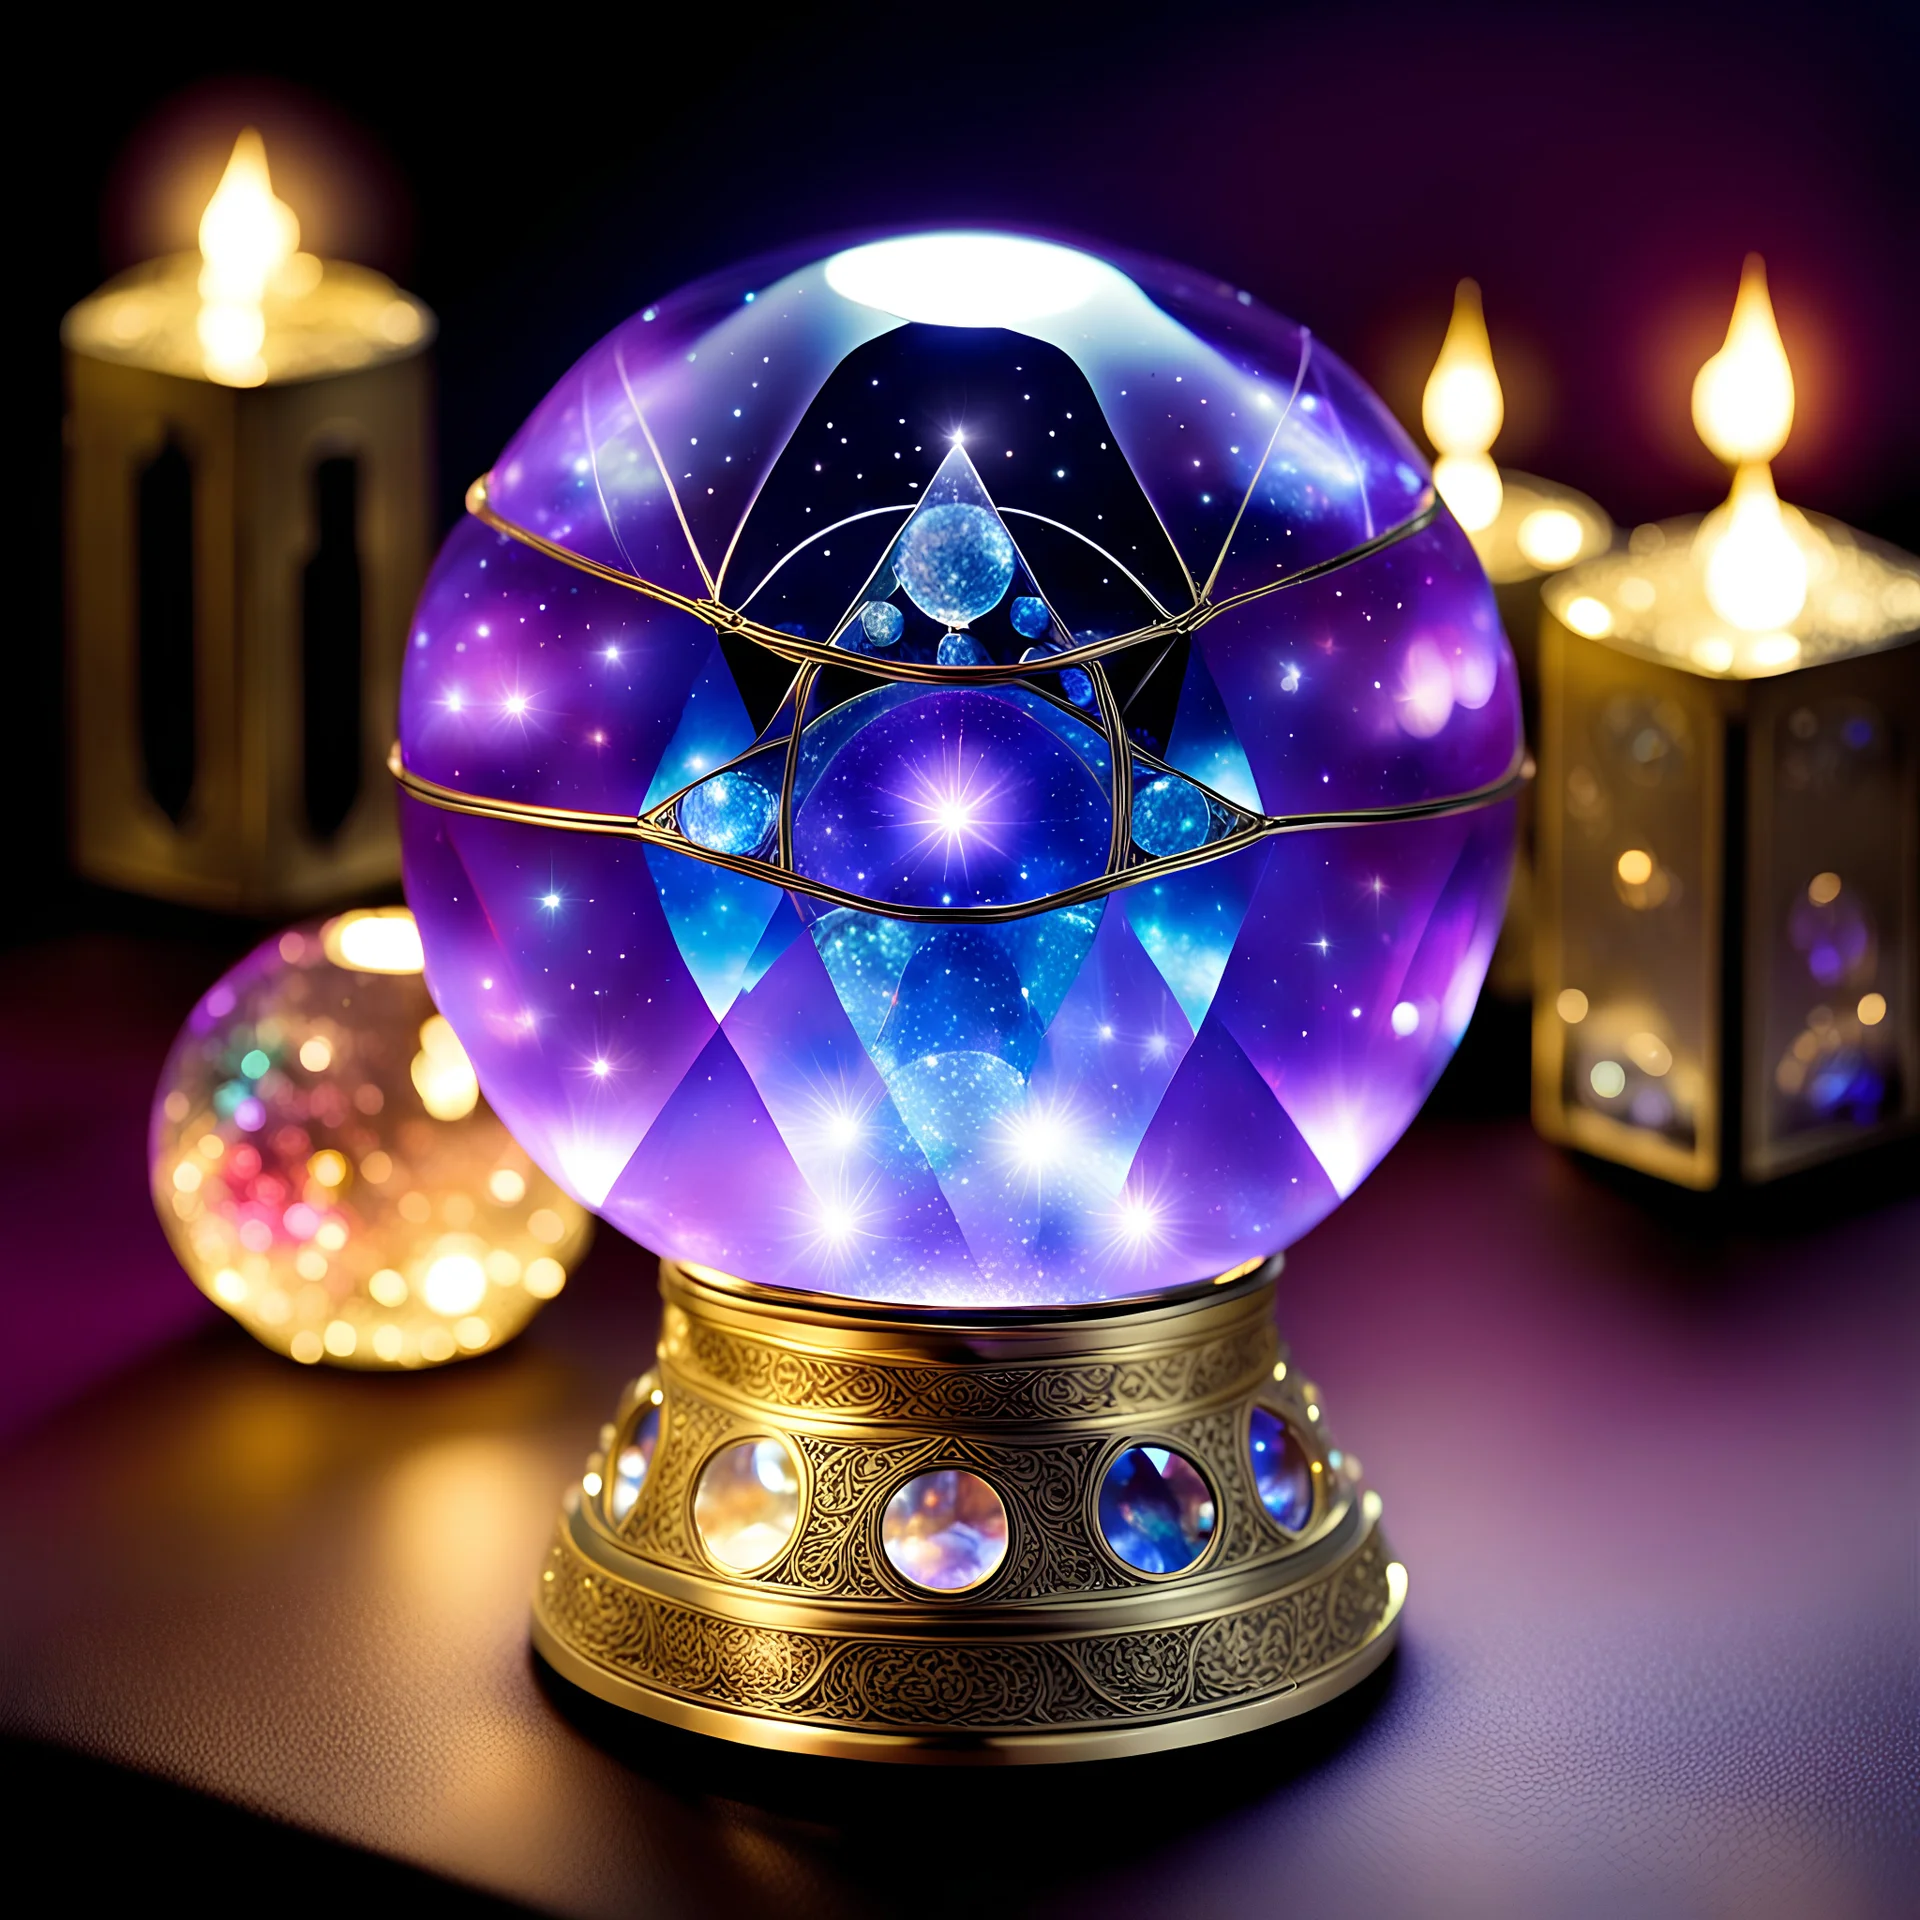 Magic item - Crystal Tarot Amplifier. This exquisite artifact is a small crystal ball encased in shimmering lights, creating a sense of mystery. When used during fortune telling with Tarot cards, the Tarot Amplifier strengthens the connection between the fortuneteller and the cards, expanding the channels of intuition and sharpening the perception of symbols. Each touch of an object brings a feeling of warmth and strength, giving the fortuneteller confidence in his predictions.